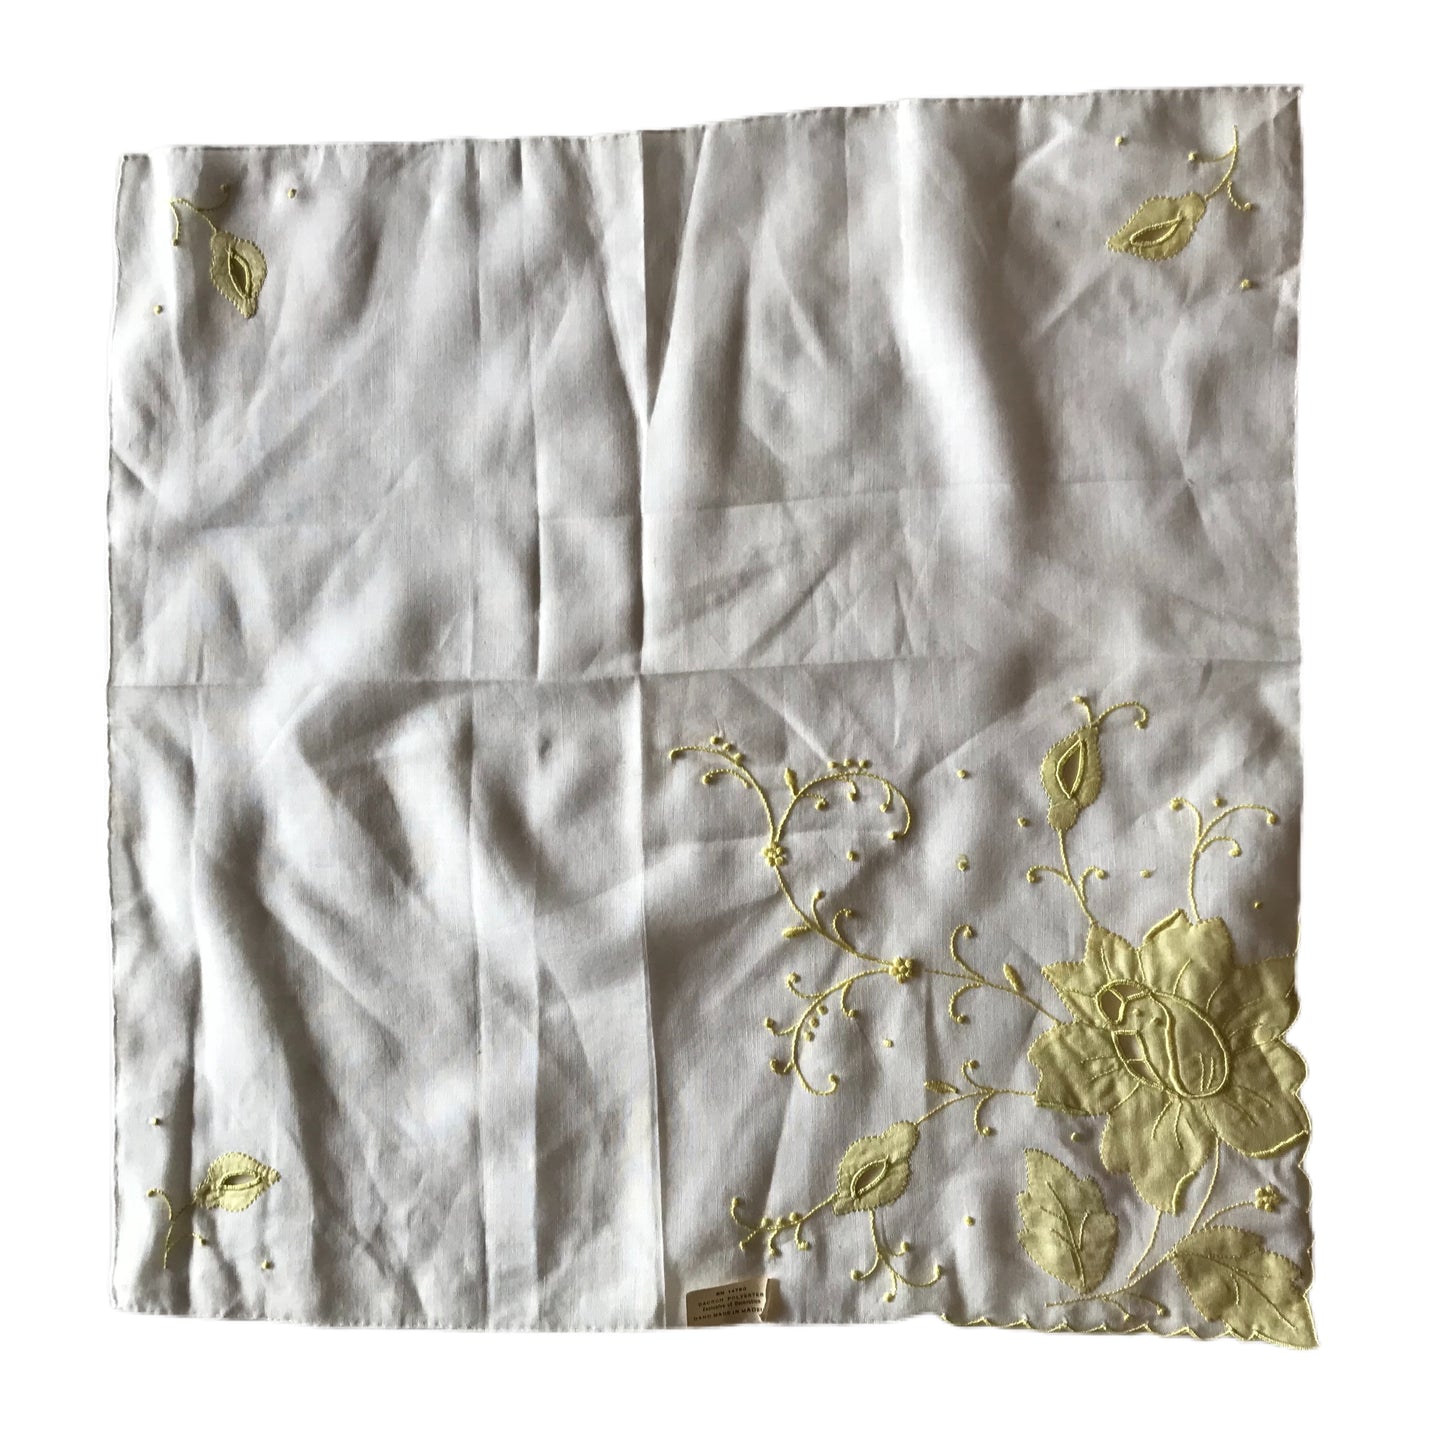 White Handkerchief with Cutwork Yellow Flowers and Embroidery circa 1940s